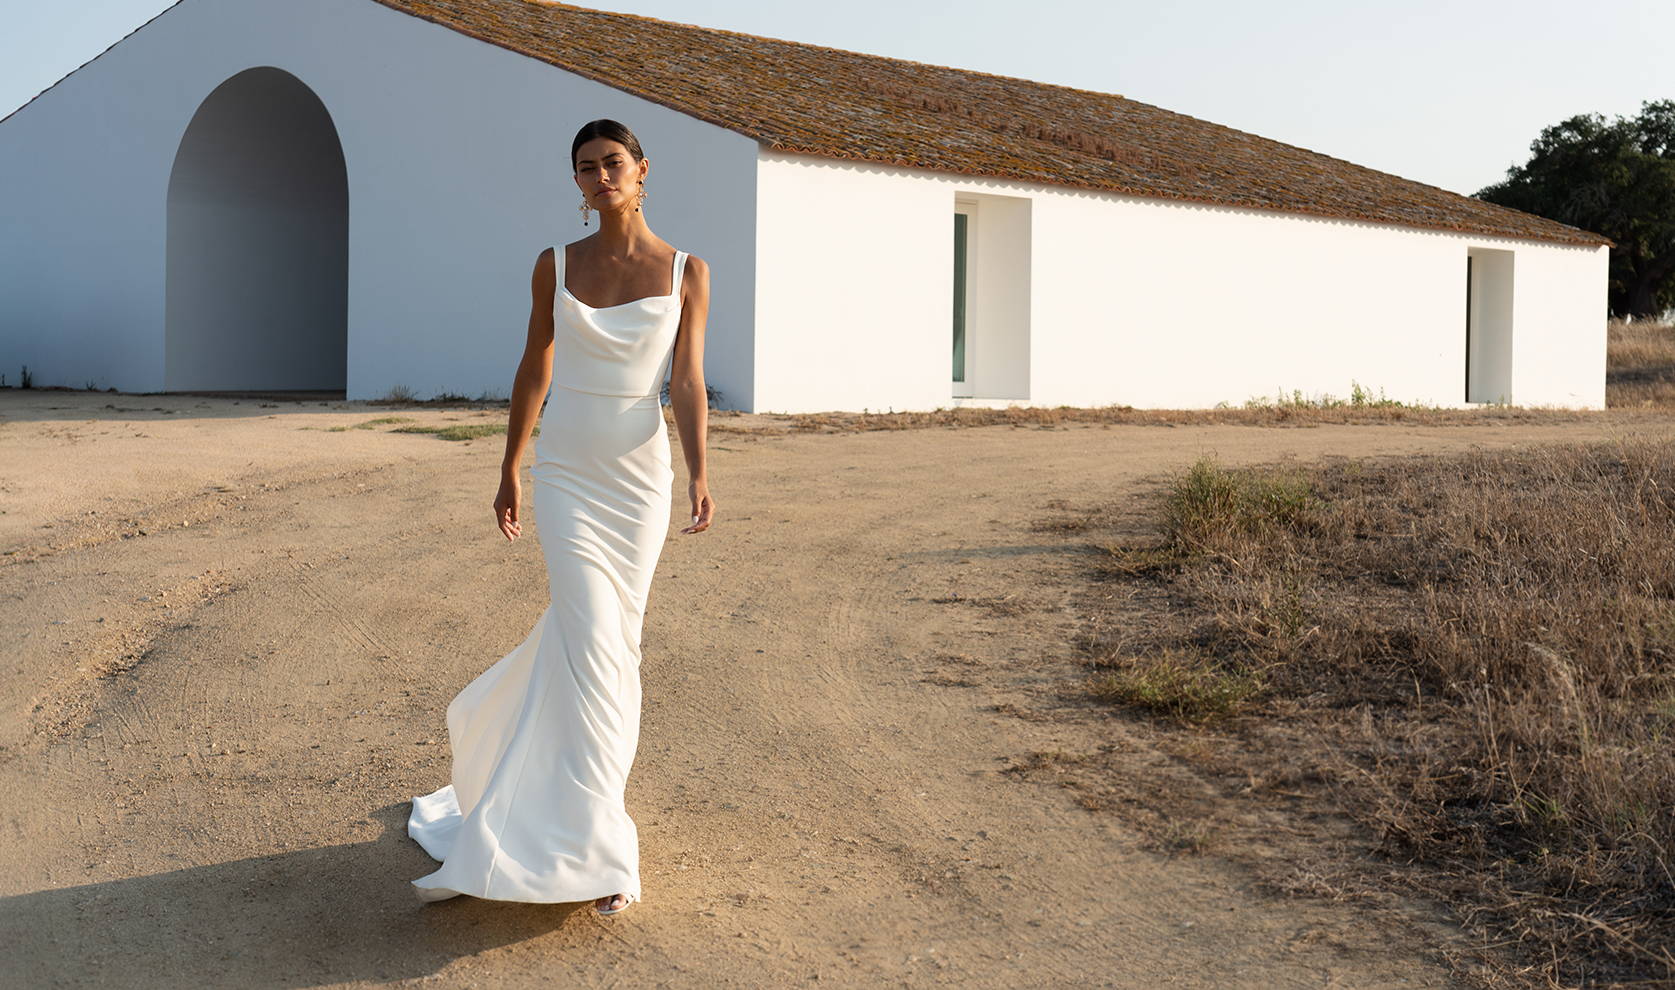 Landscape image of bride outside house in Portgual wearing the Grace wedding gown